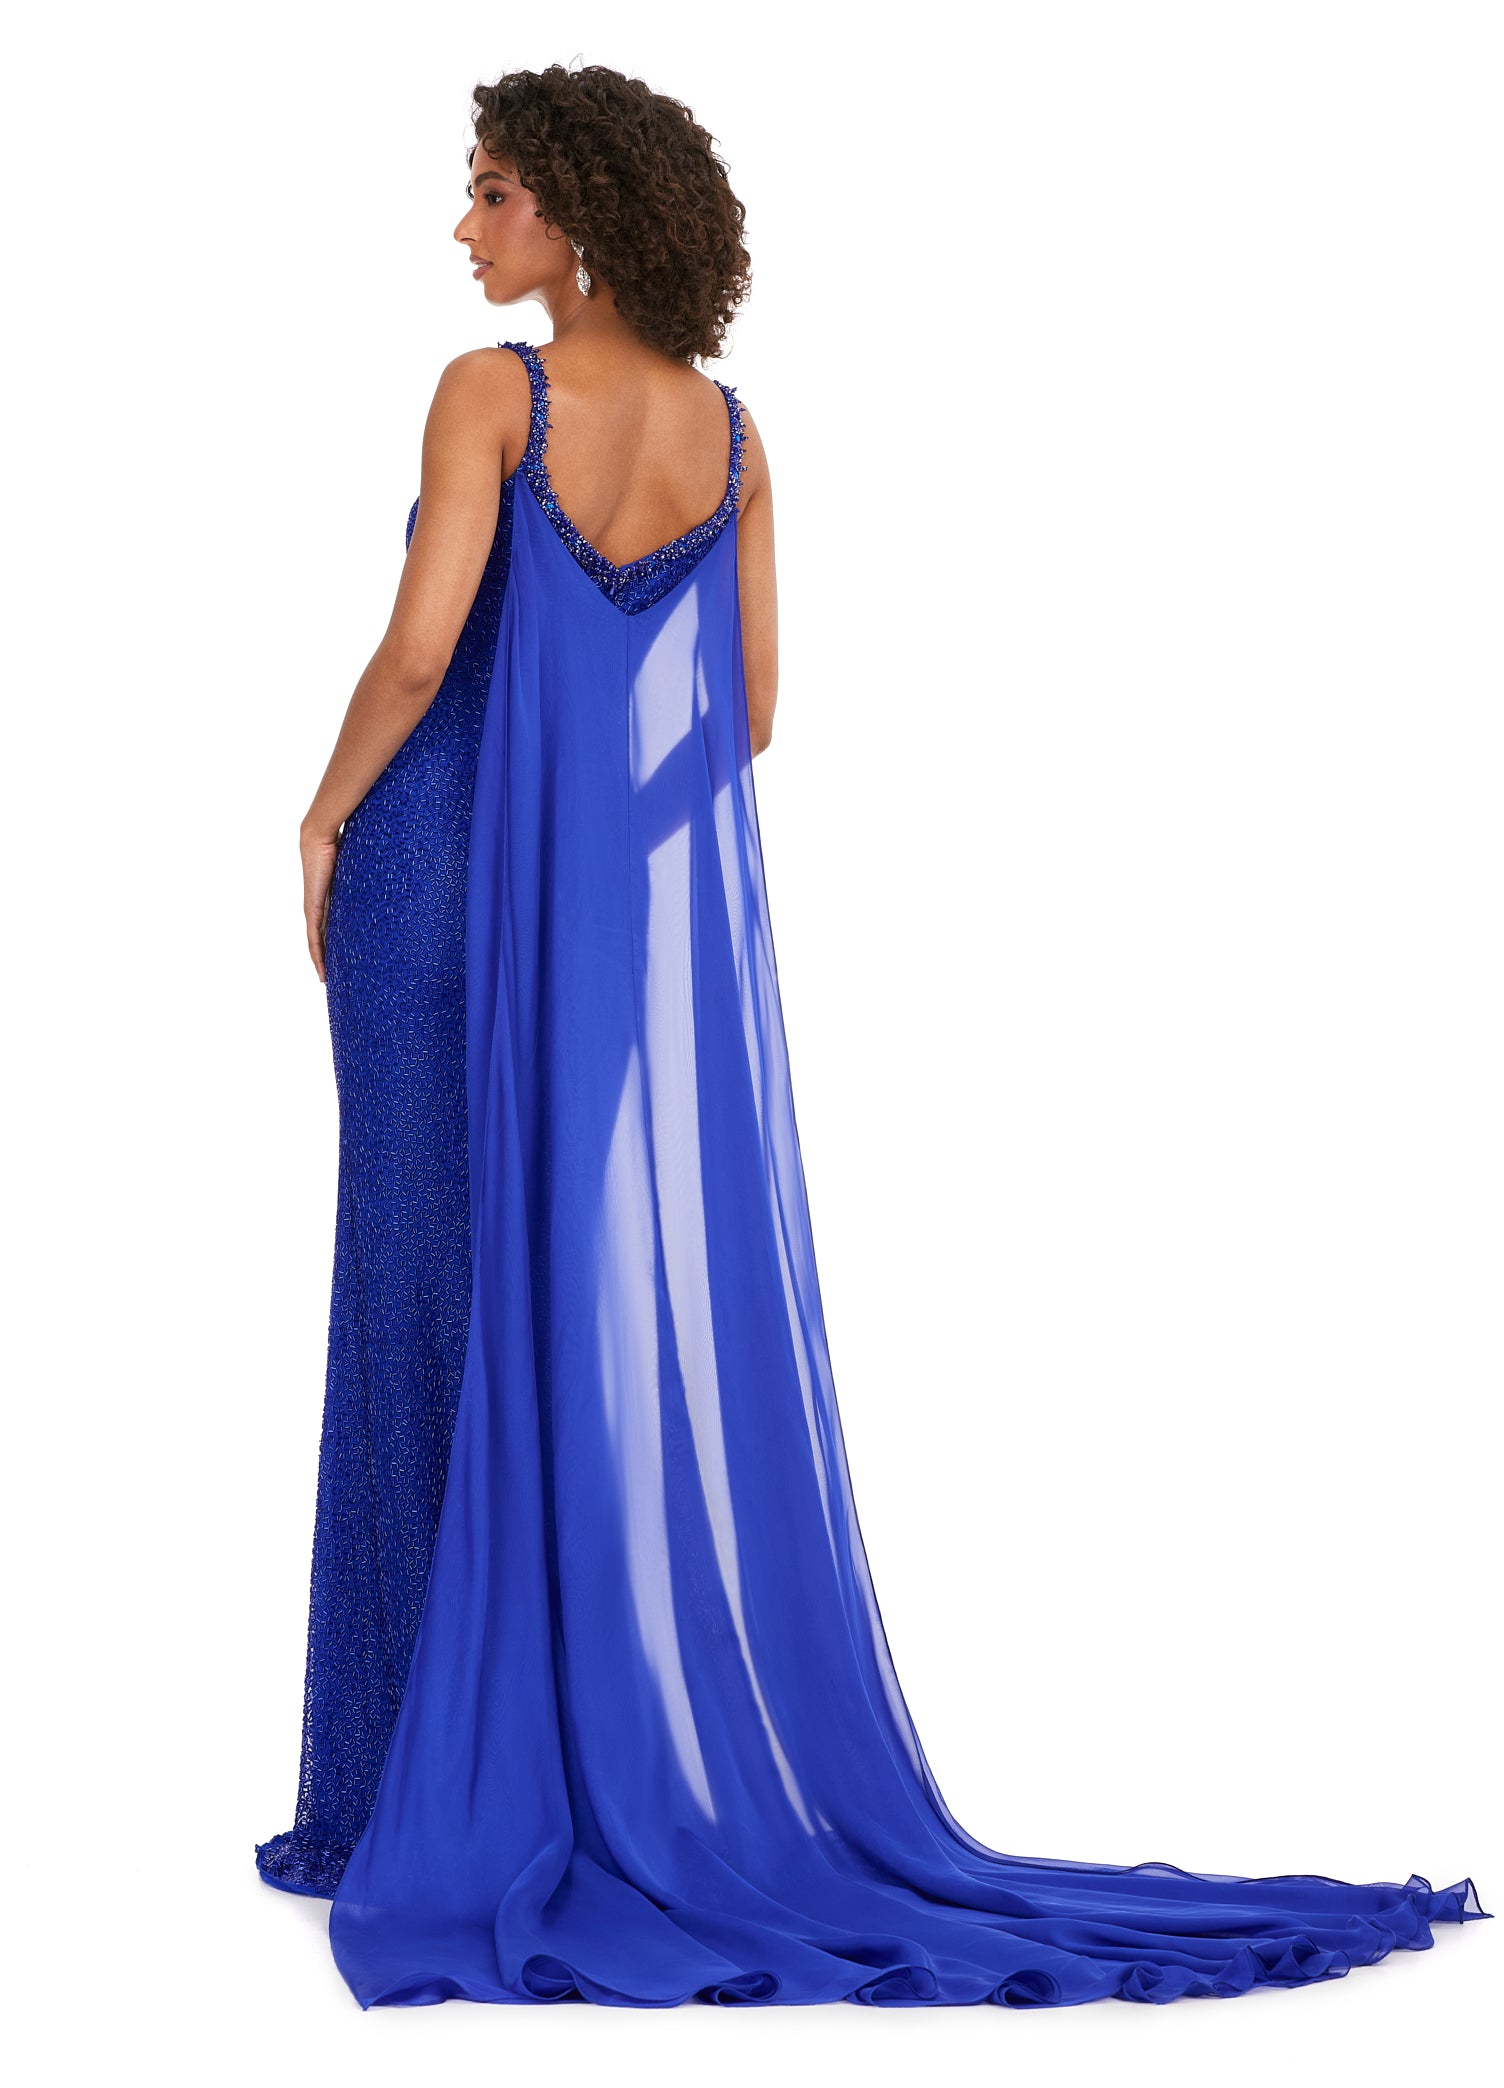 Long Halter Royal Blue Formal Prom Dress Cape with Sweep Train | Cocosbride